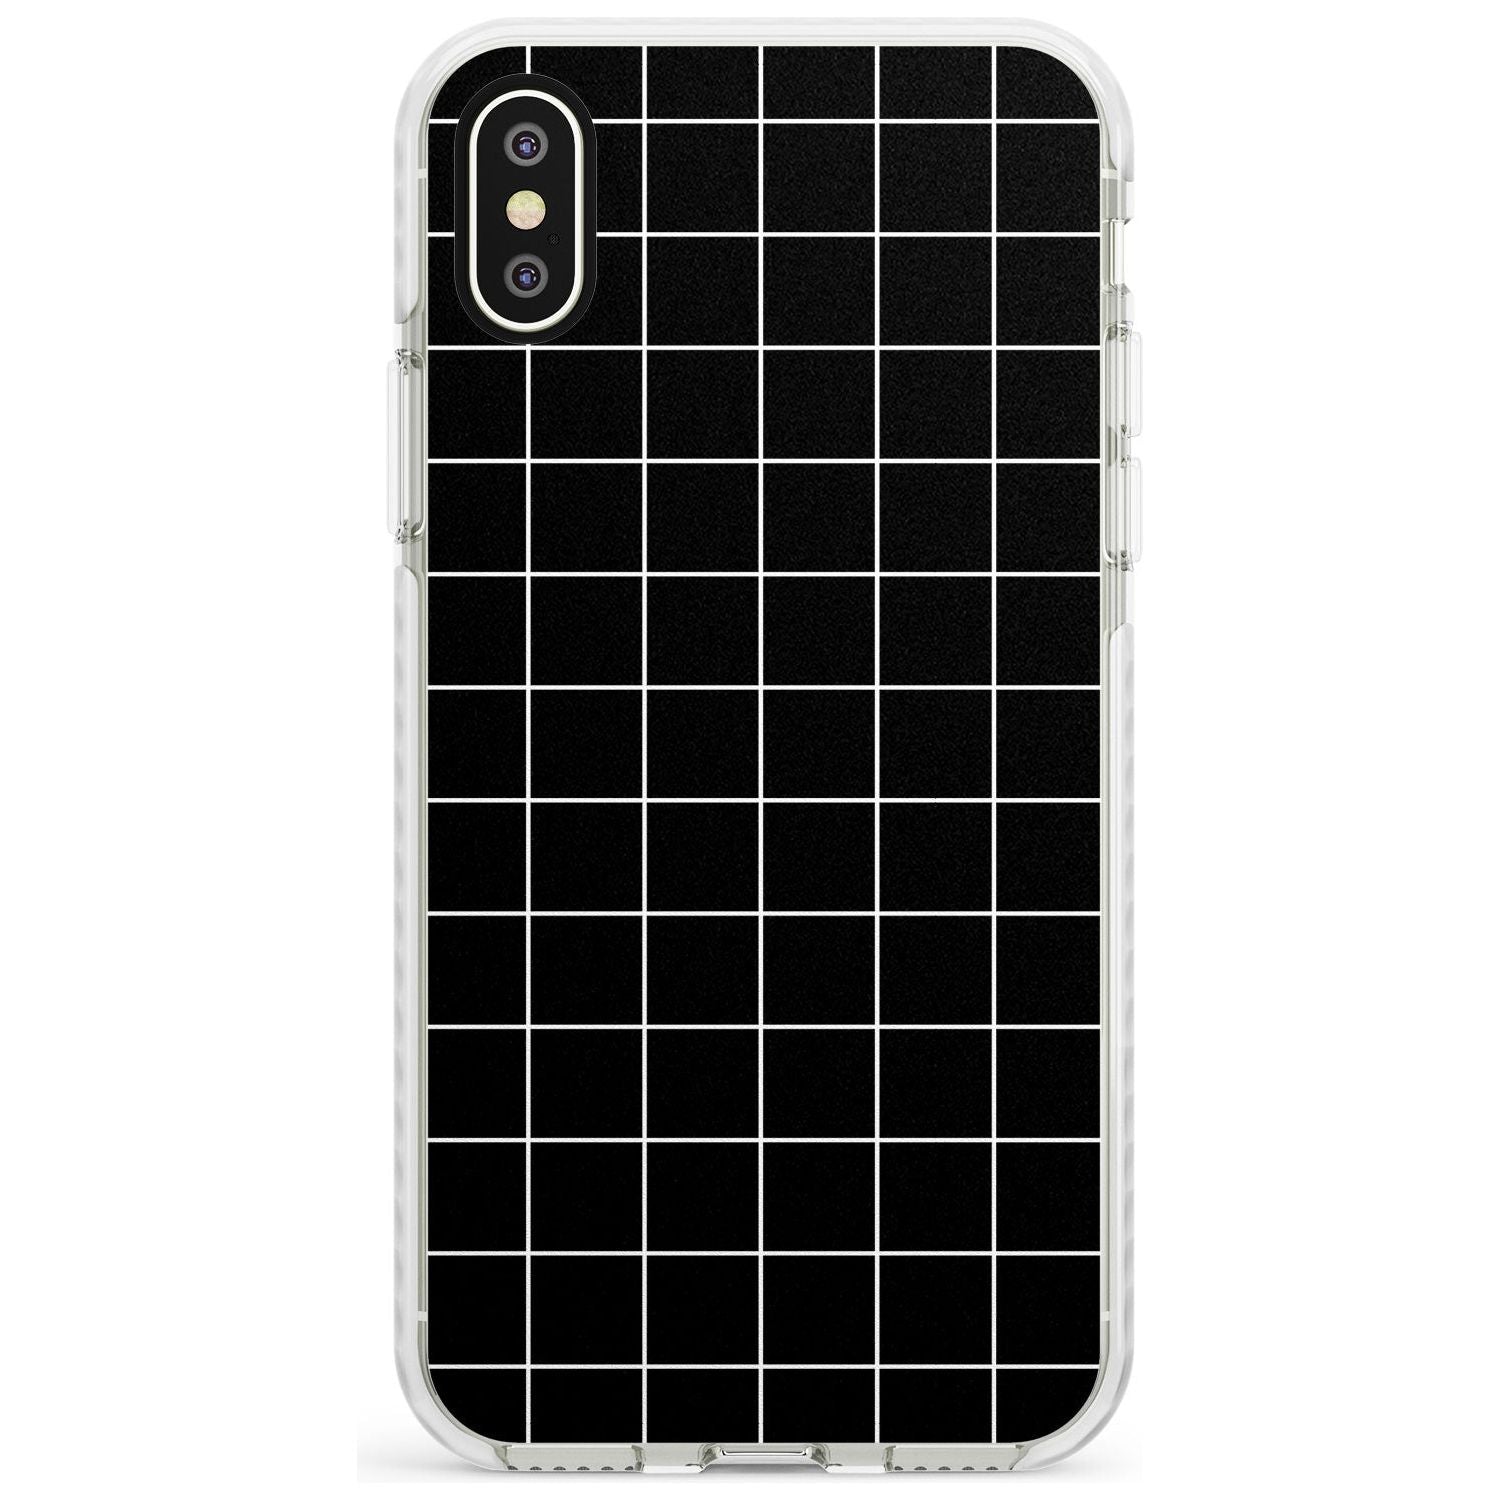 Simplistic Large Grid Pattern Black Impact Phone Case for iPhone X XS Max XR